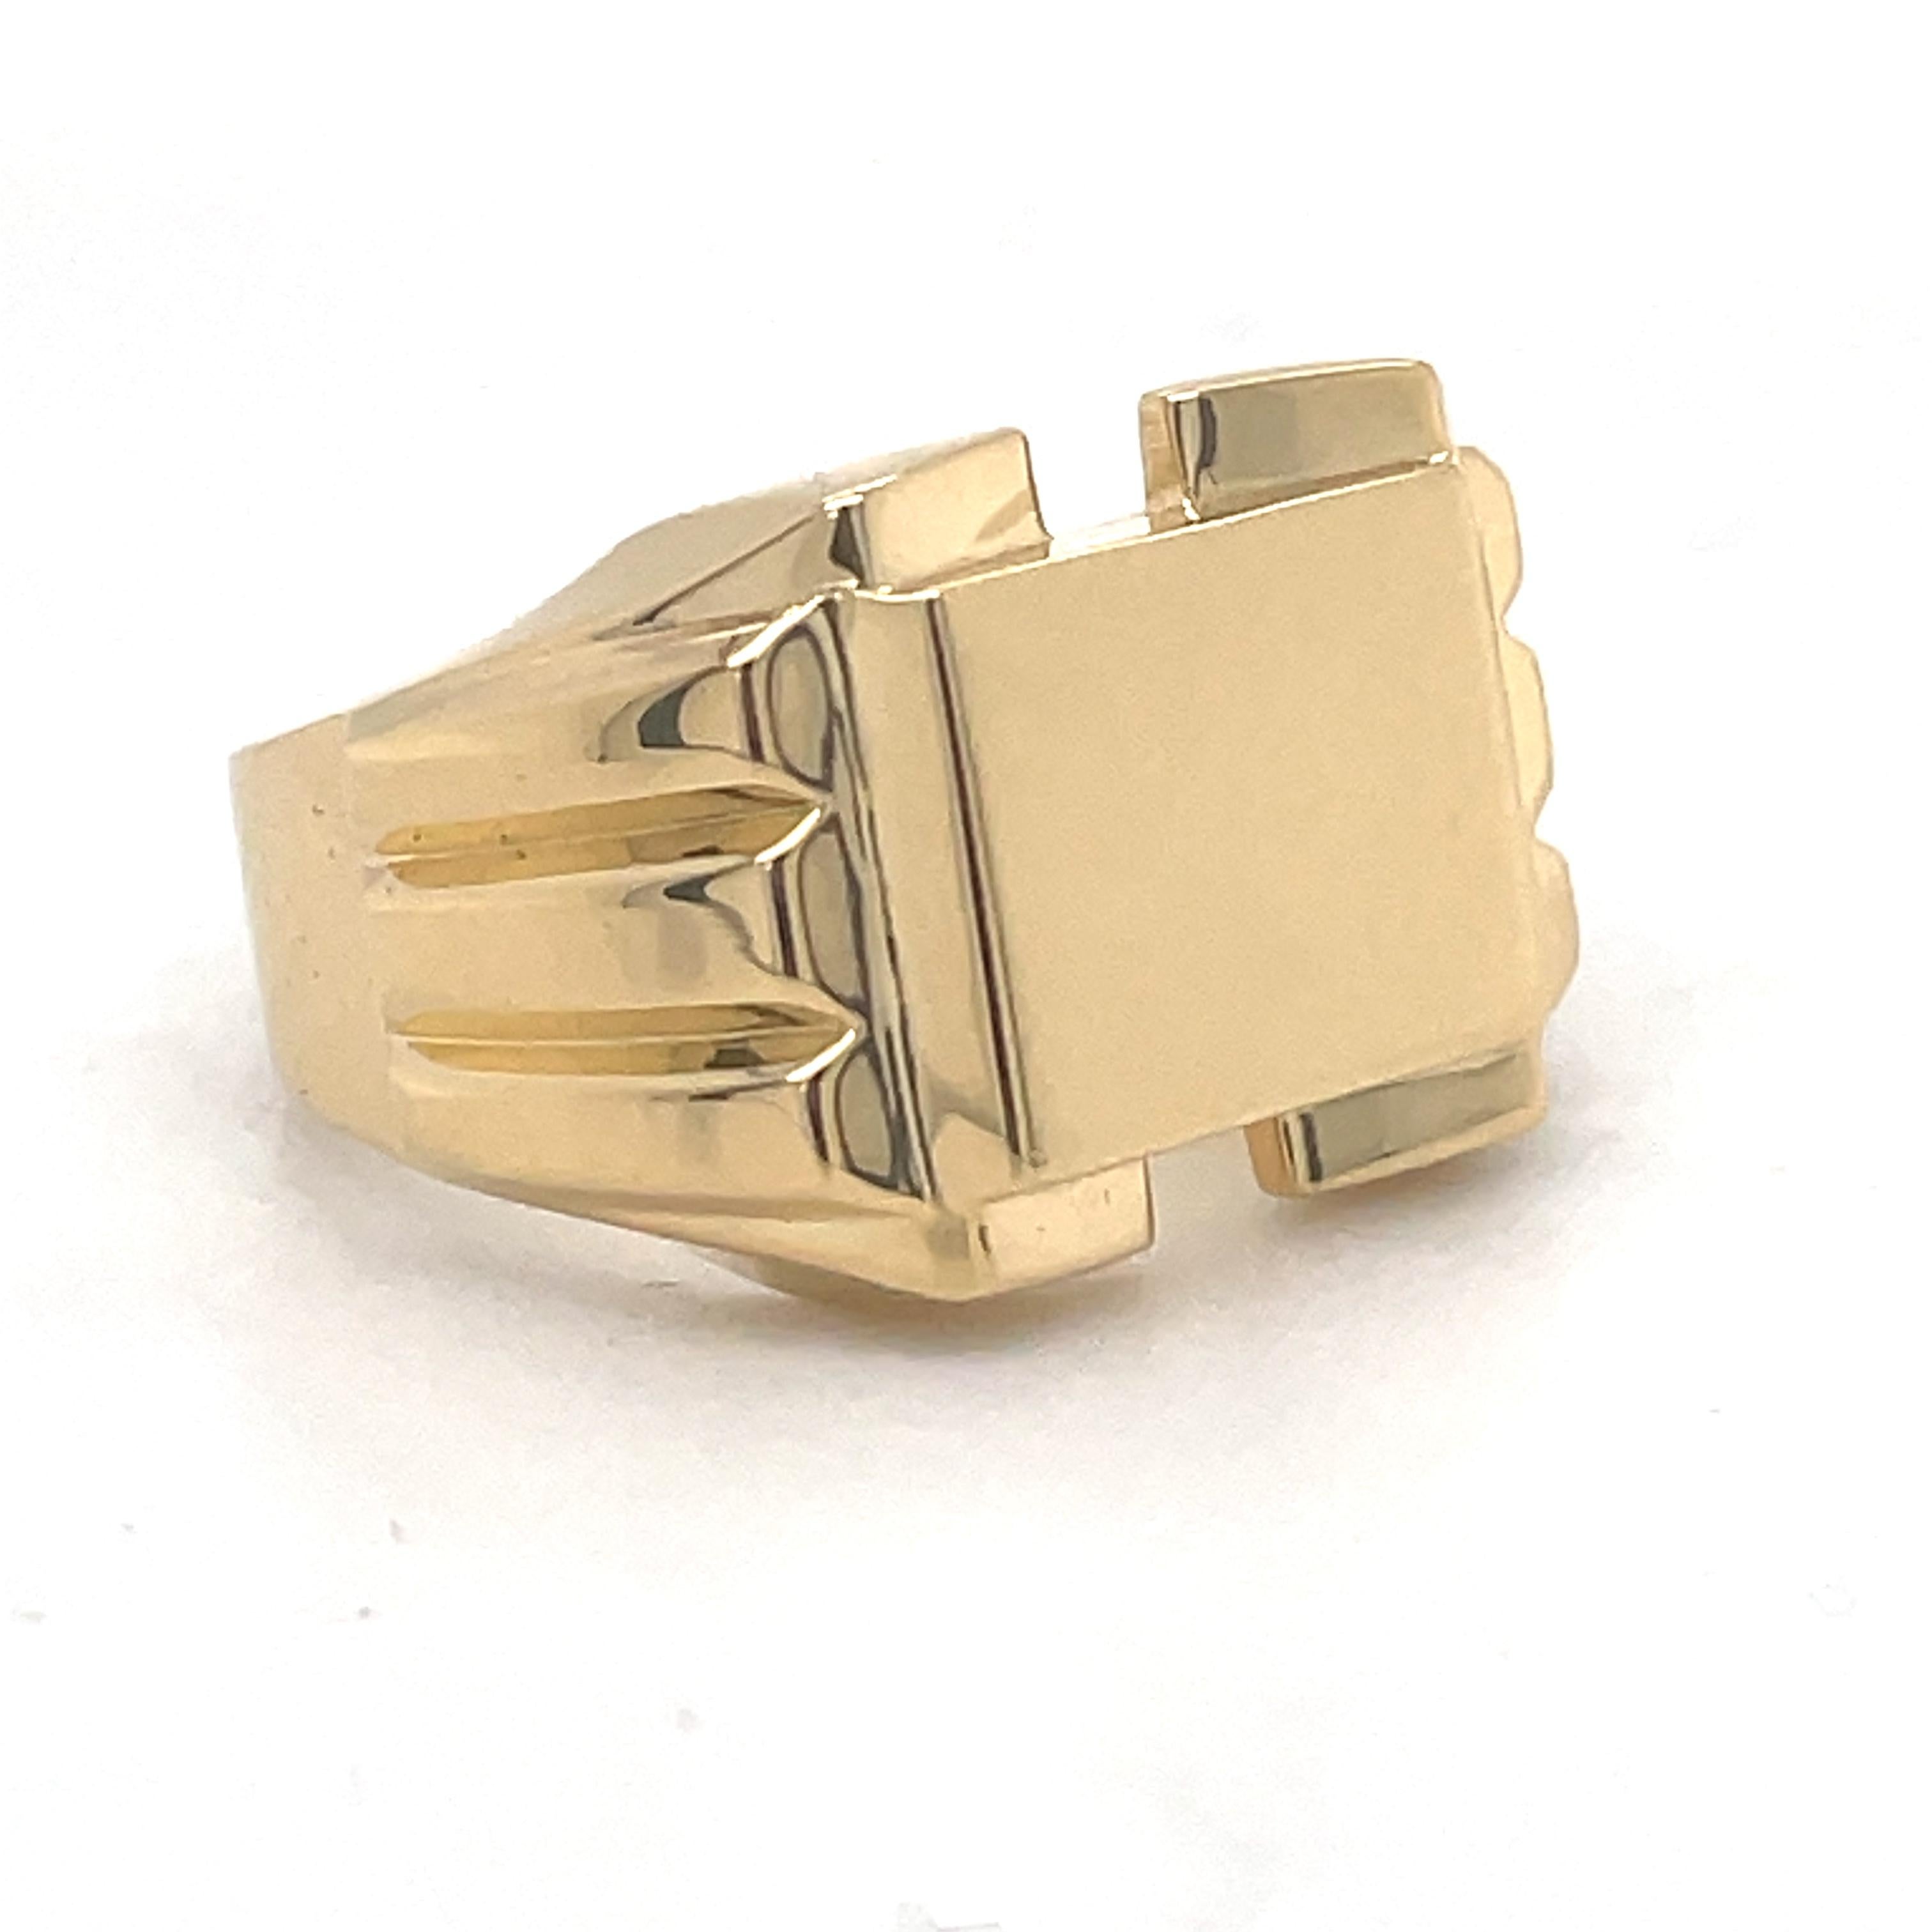 Unisex Gold Signet Ring, Vintage Style Ring, 14k Yellow Gold, made to order ring For Sale 5